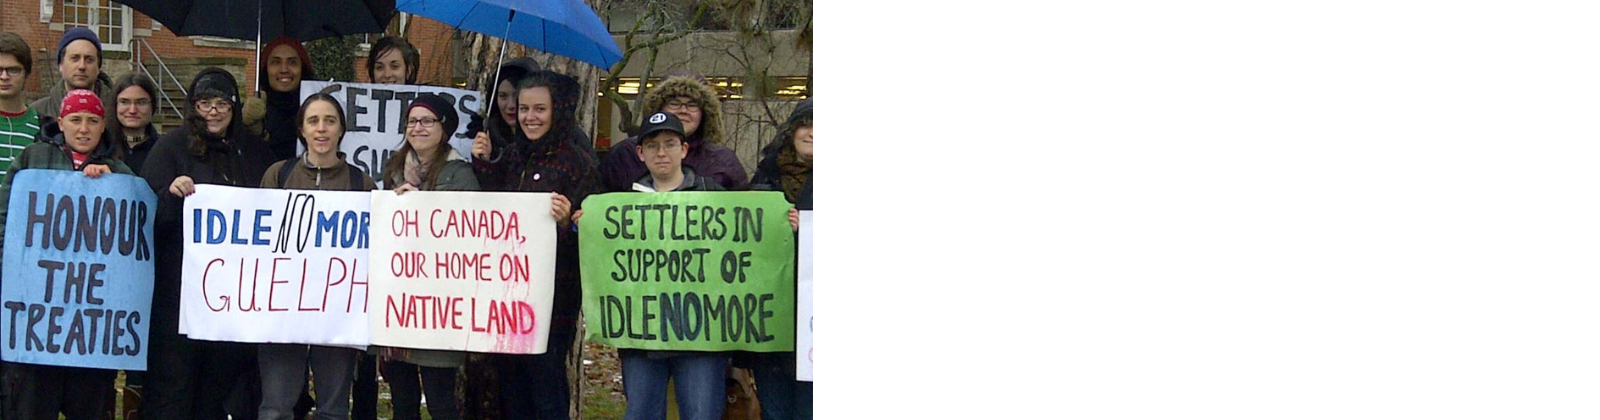 A group of people wearing winter clothing stand together on a ice and snow covered grassy area located in front of Zavitz Hall at the University of Guelph. Several signs are held by the smiling participants and read "Honour The Treaties", "Idle No More Guelph", "Oh Canada, Our Home On Native Land", and "Settlers In Support of IdleNoMore".